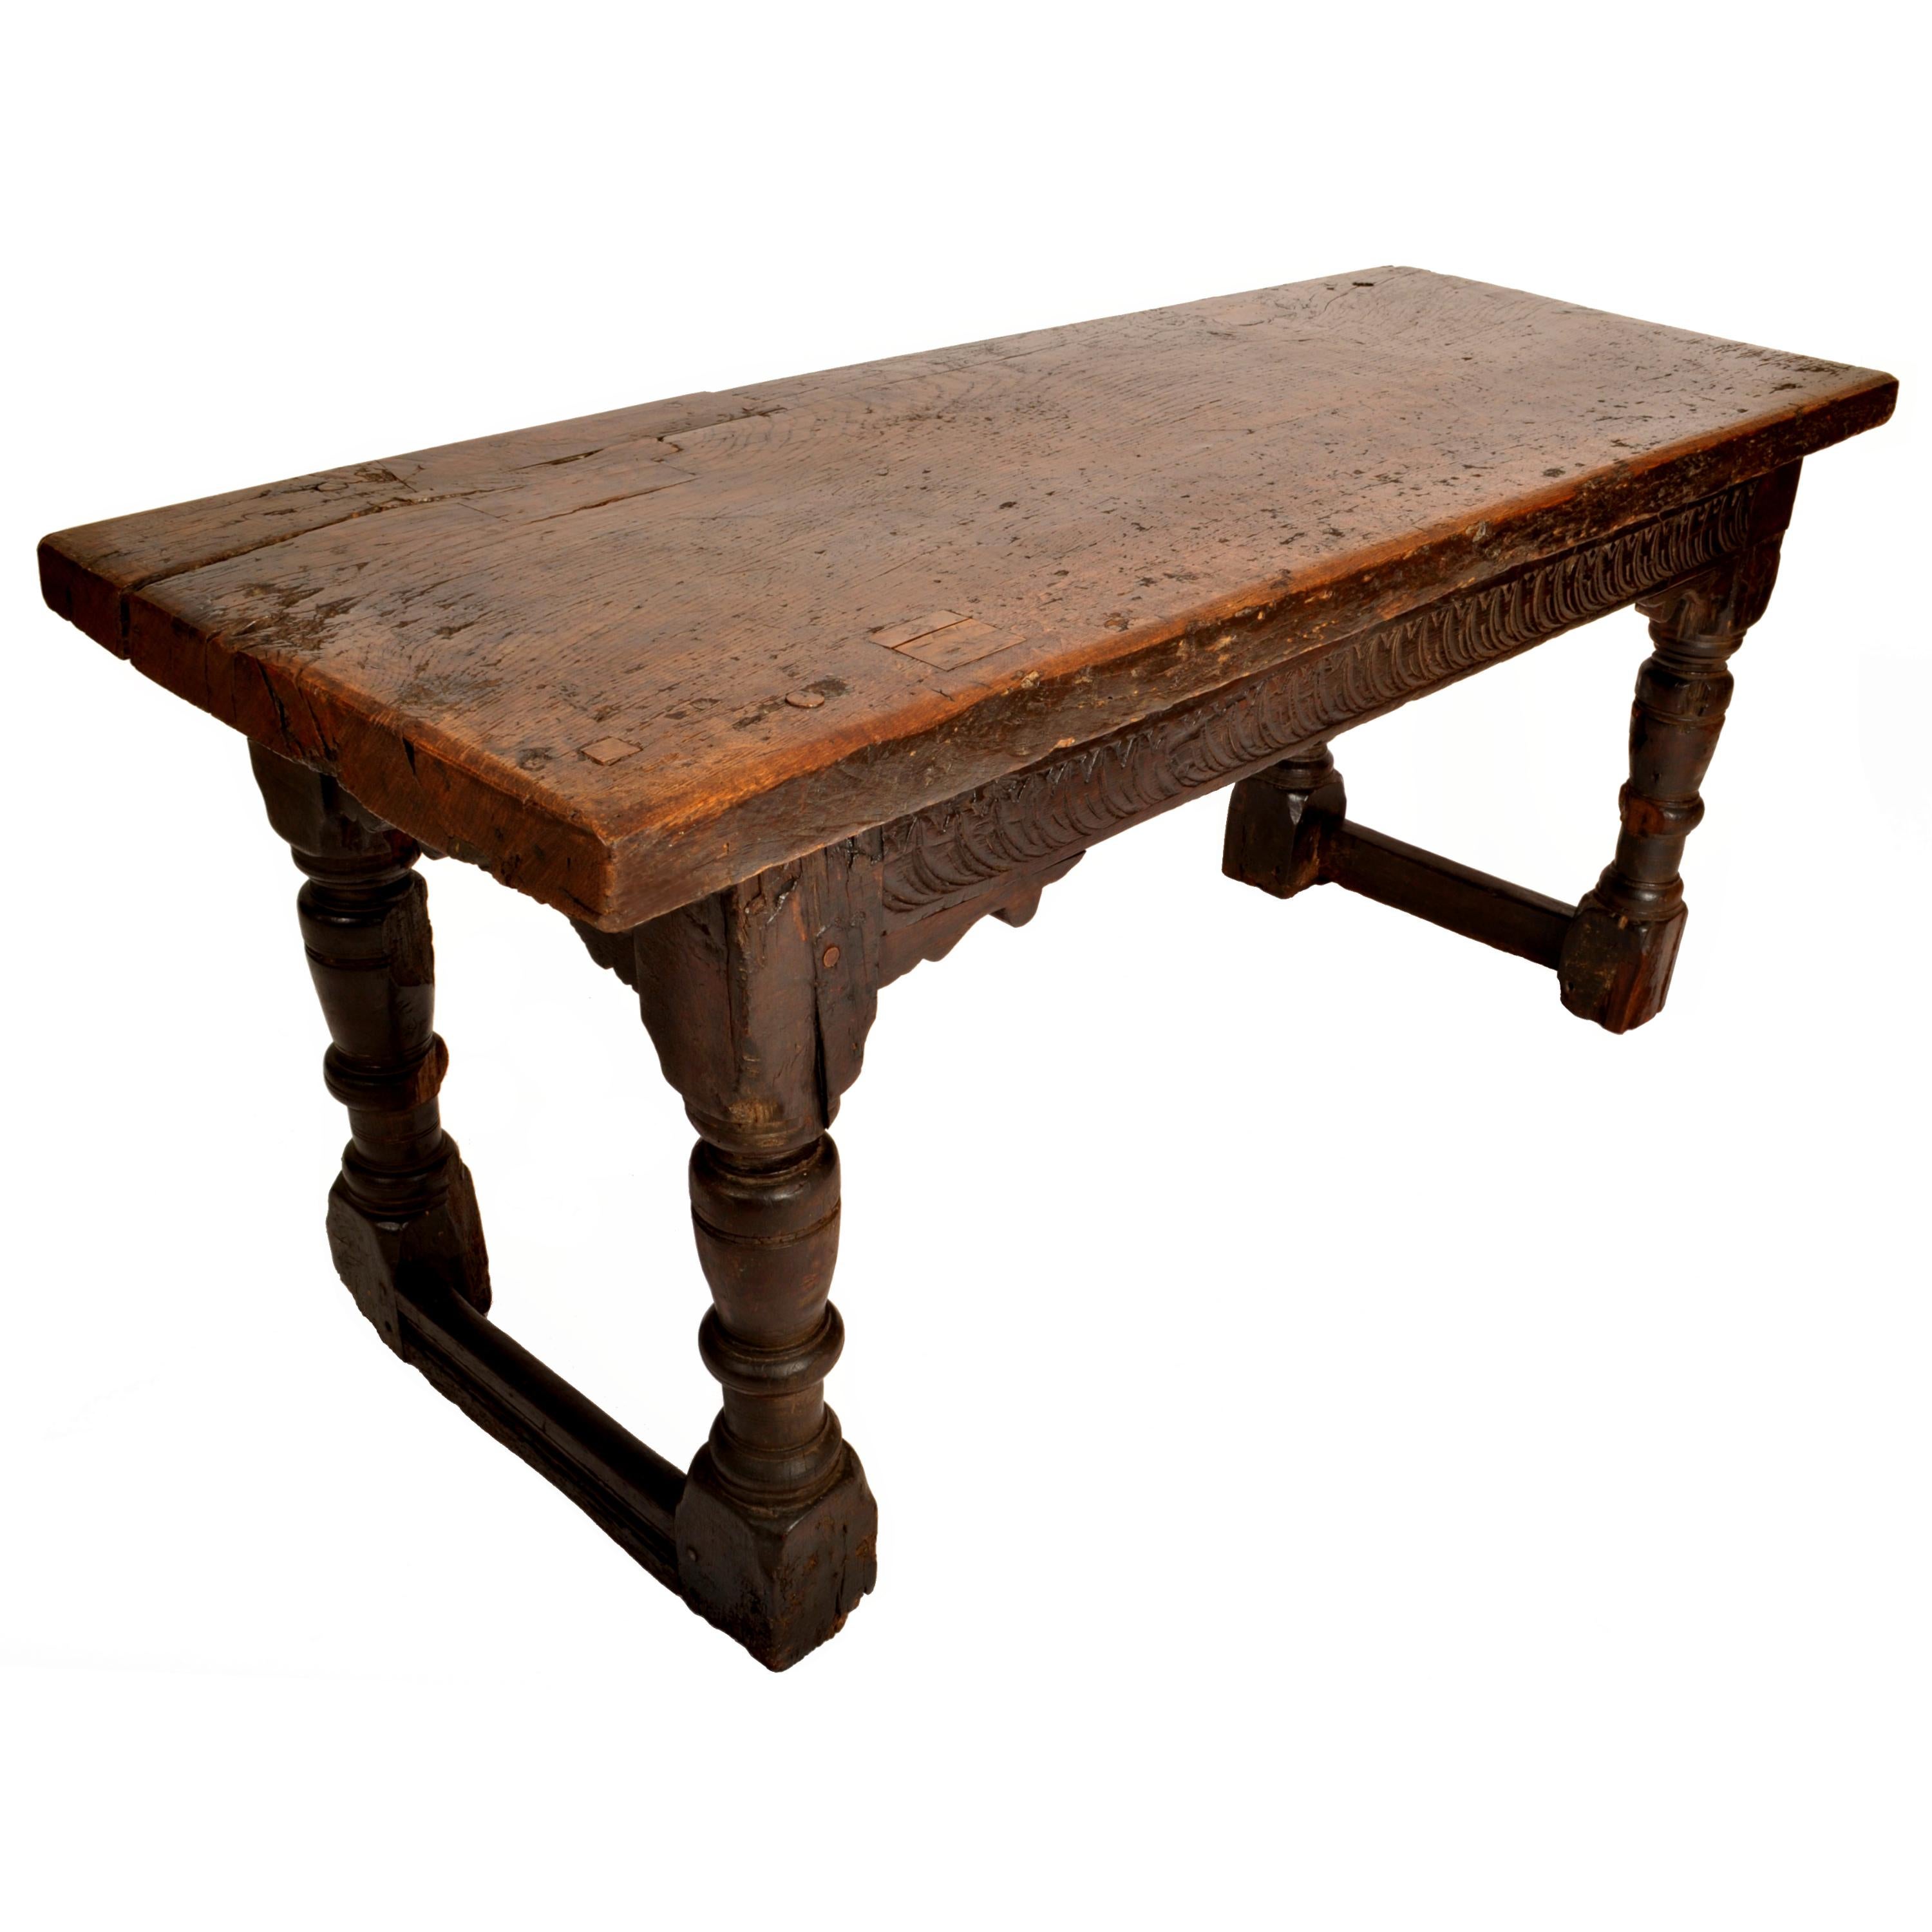 Antique 16th Century Elizabethan Tudor Carved Oak Dining Refectory Table, 1550 1